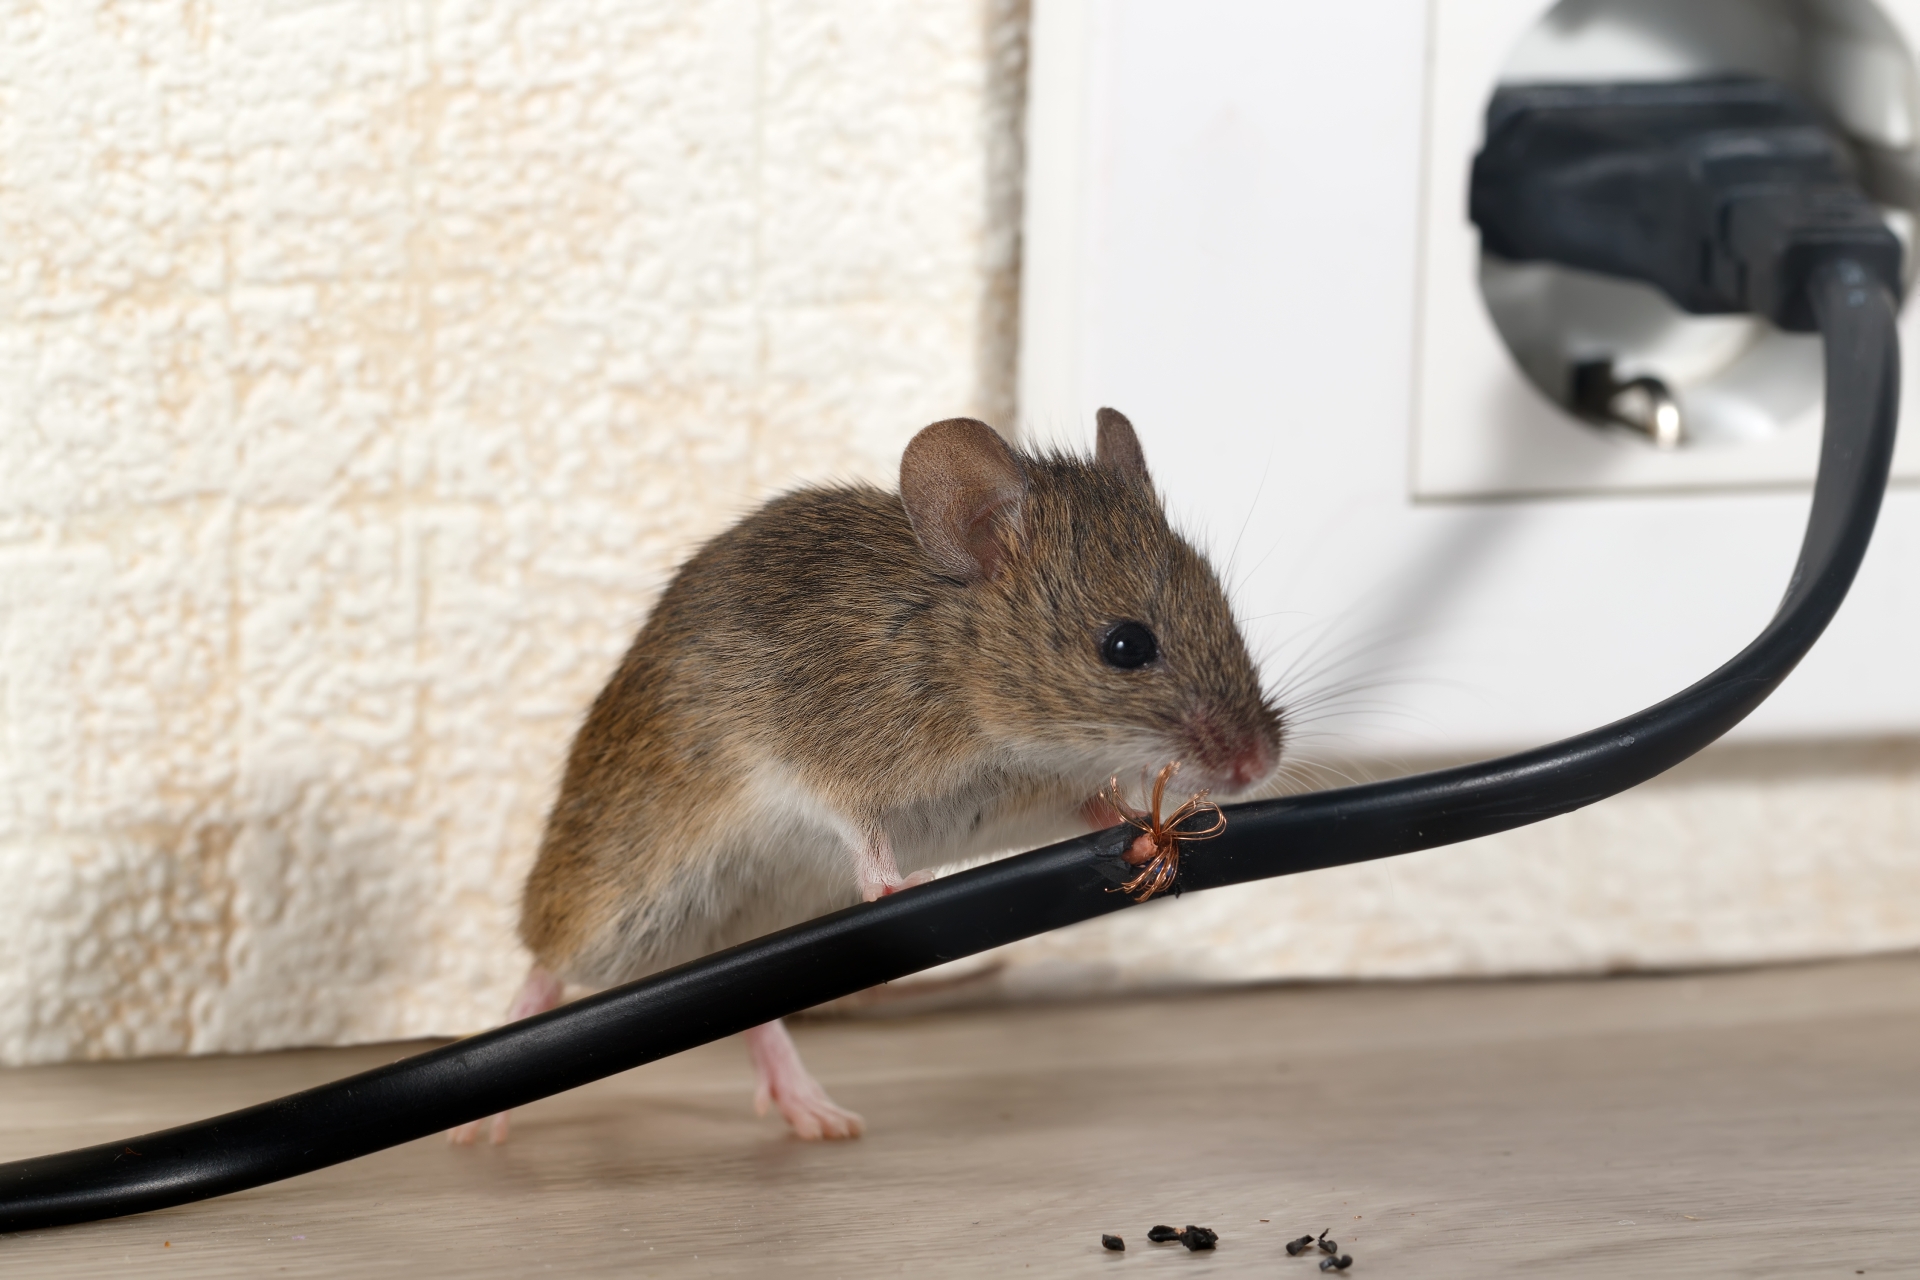 Mice Infestation, Pest Control in London. Call Now 020 3519 0469